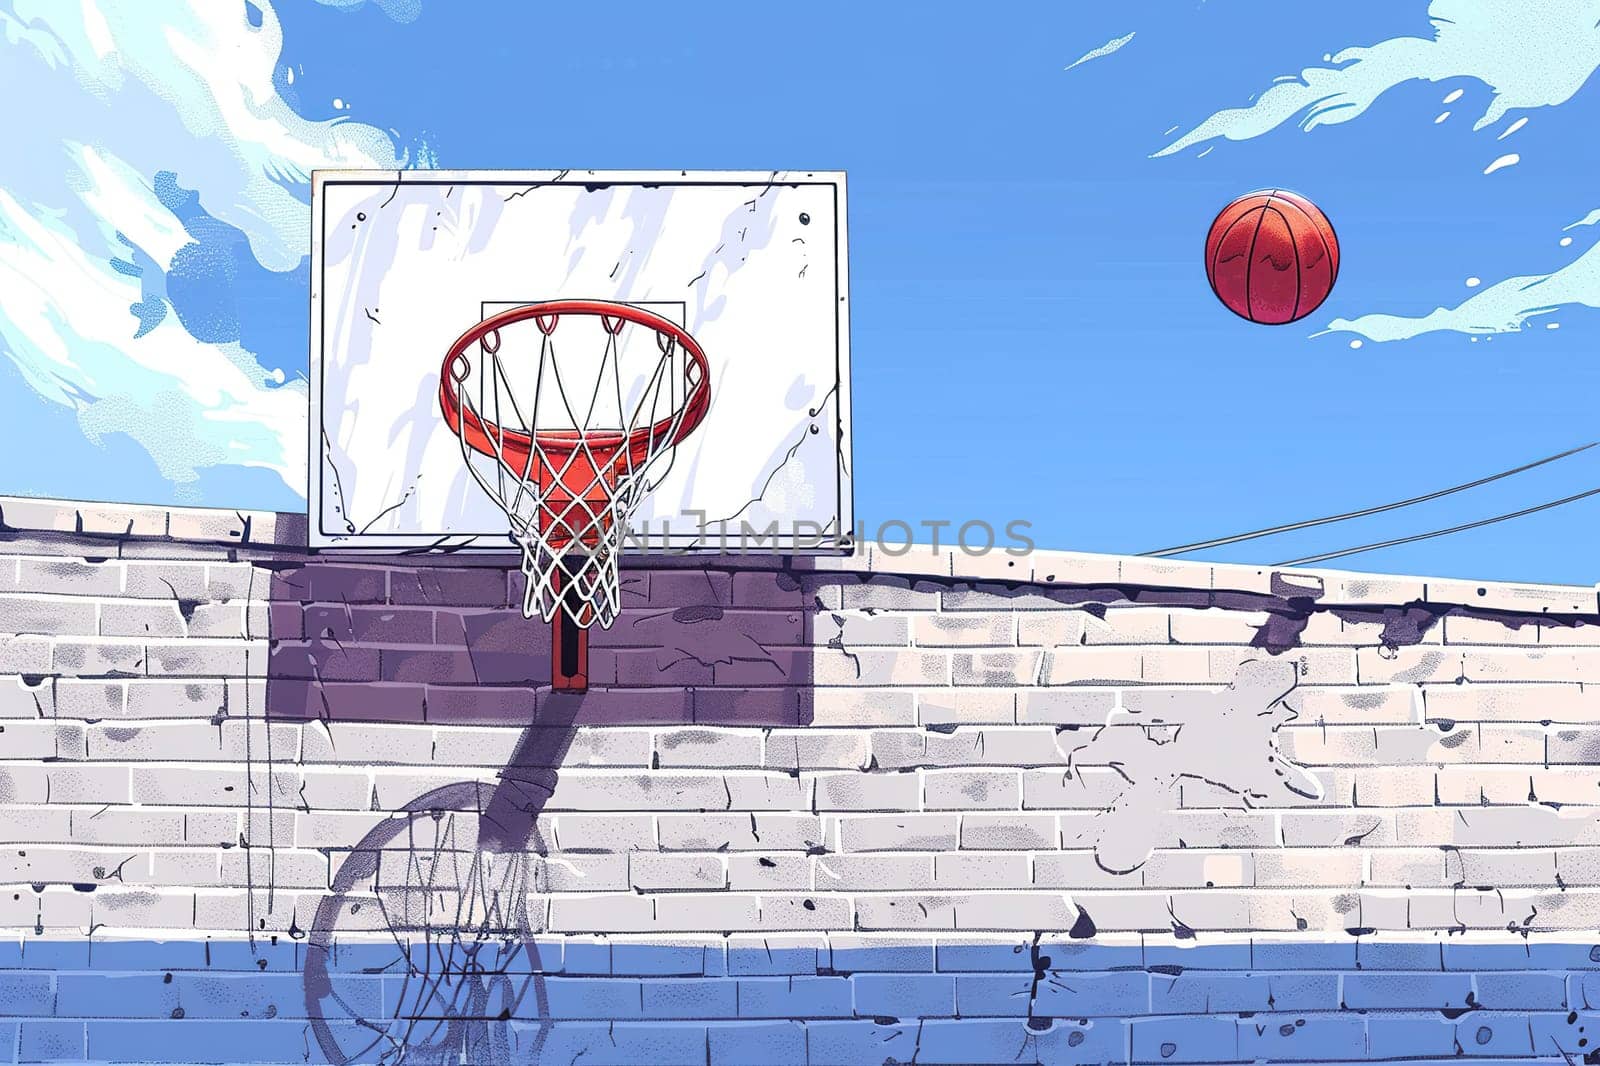 A basketball ball flies into the hoop, illustration in cartoon style. Hobbies and recreation. Generated by artificial intelligence by Vovmar